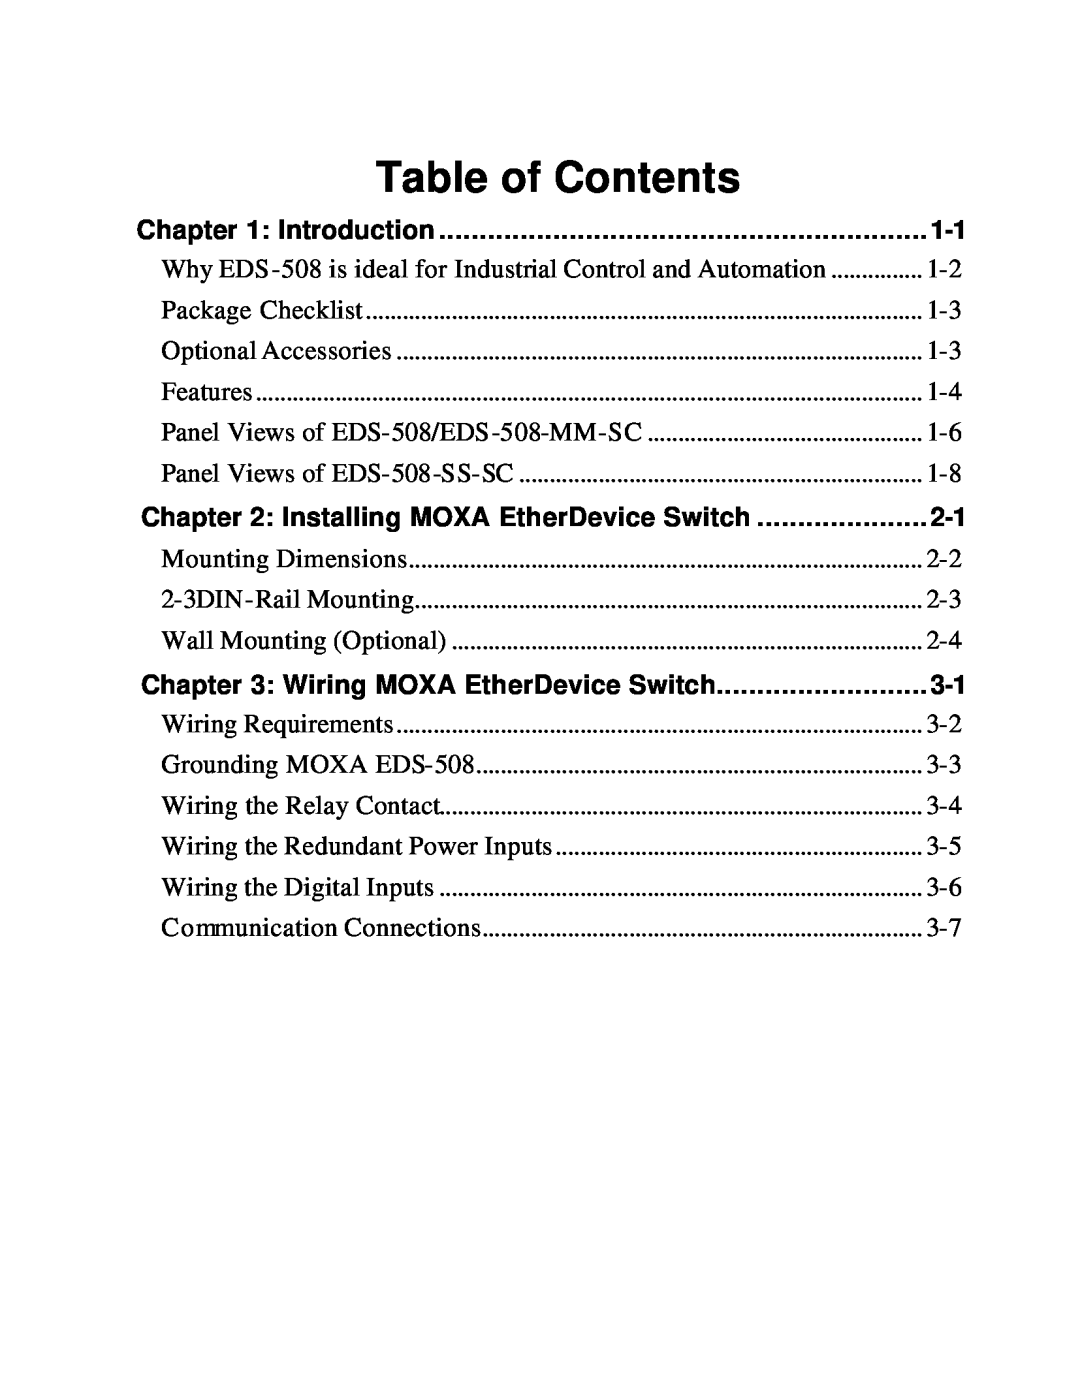 Moxa Technologies EDS-508 manual Table of Contents, Installing MOXA EtherDevice Switch, Wiring MOXA EtherDevice Switch 